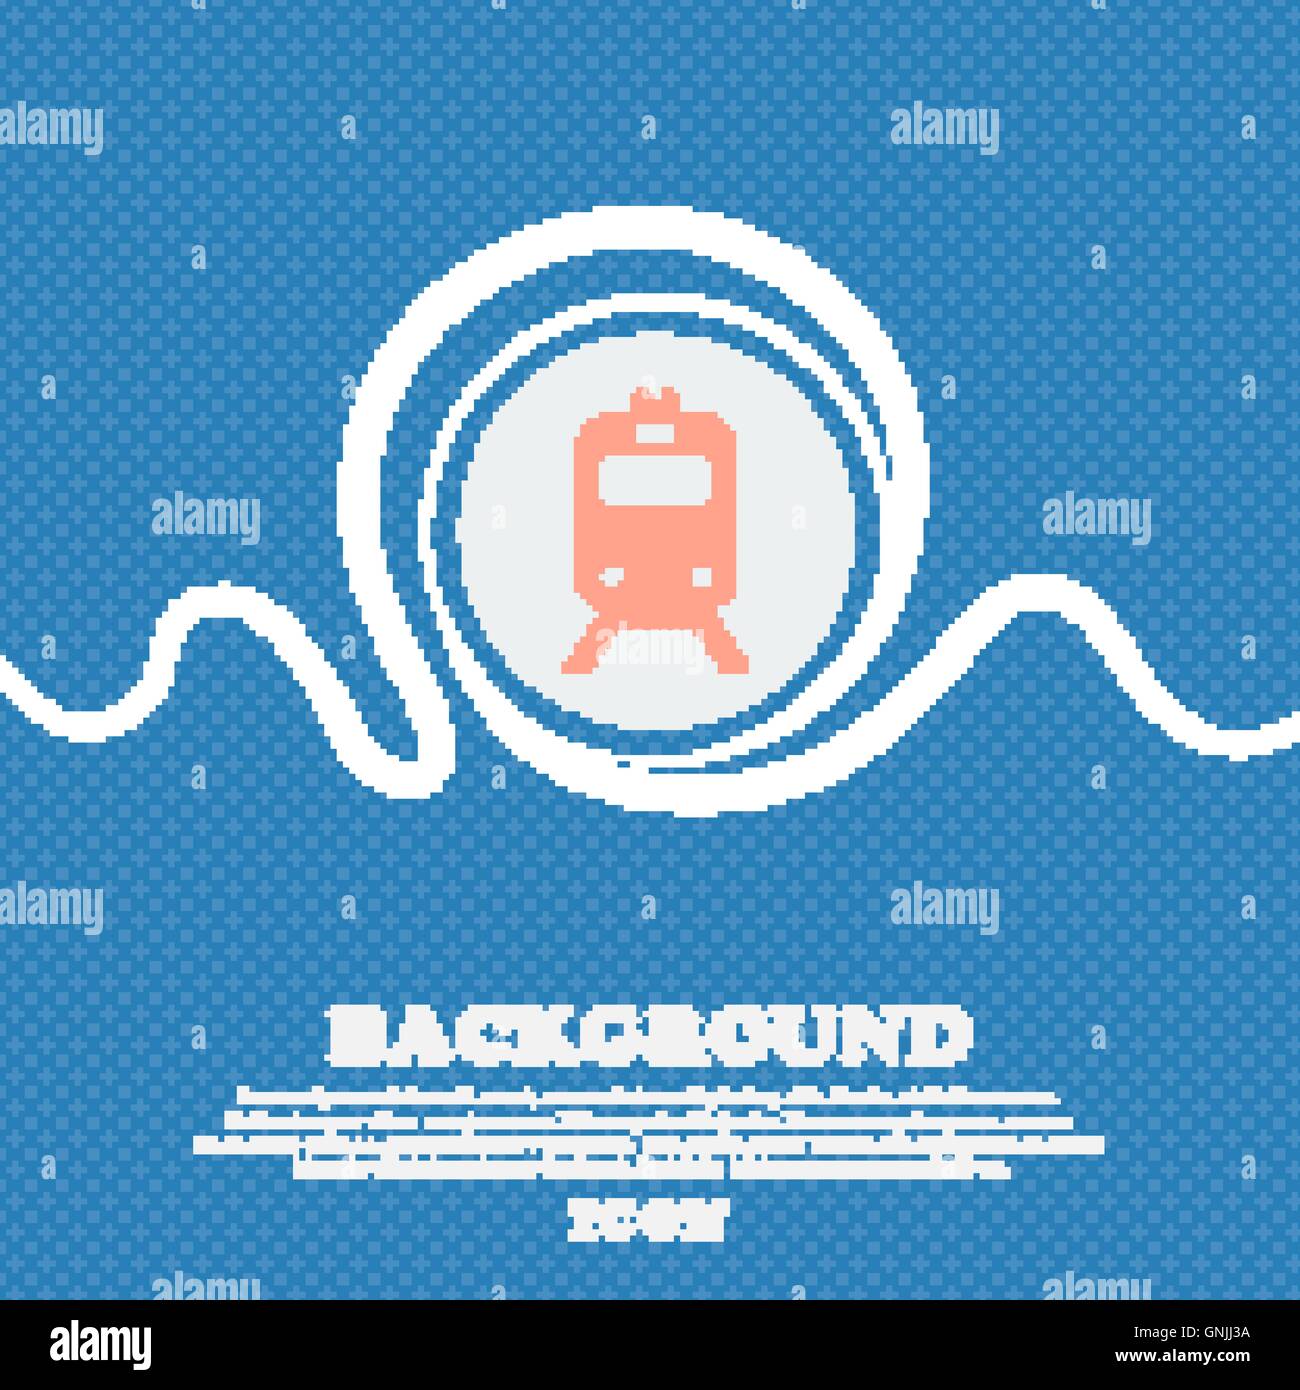 train sign icon. Blue and white abstract background flecked with space for text and your design. Vector Stock Vector